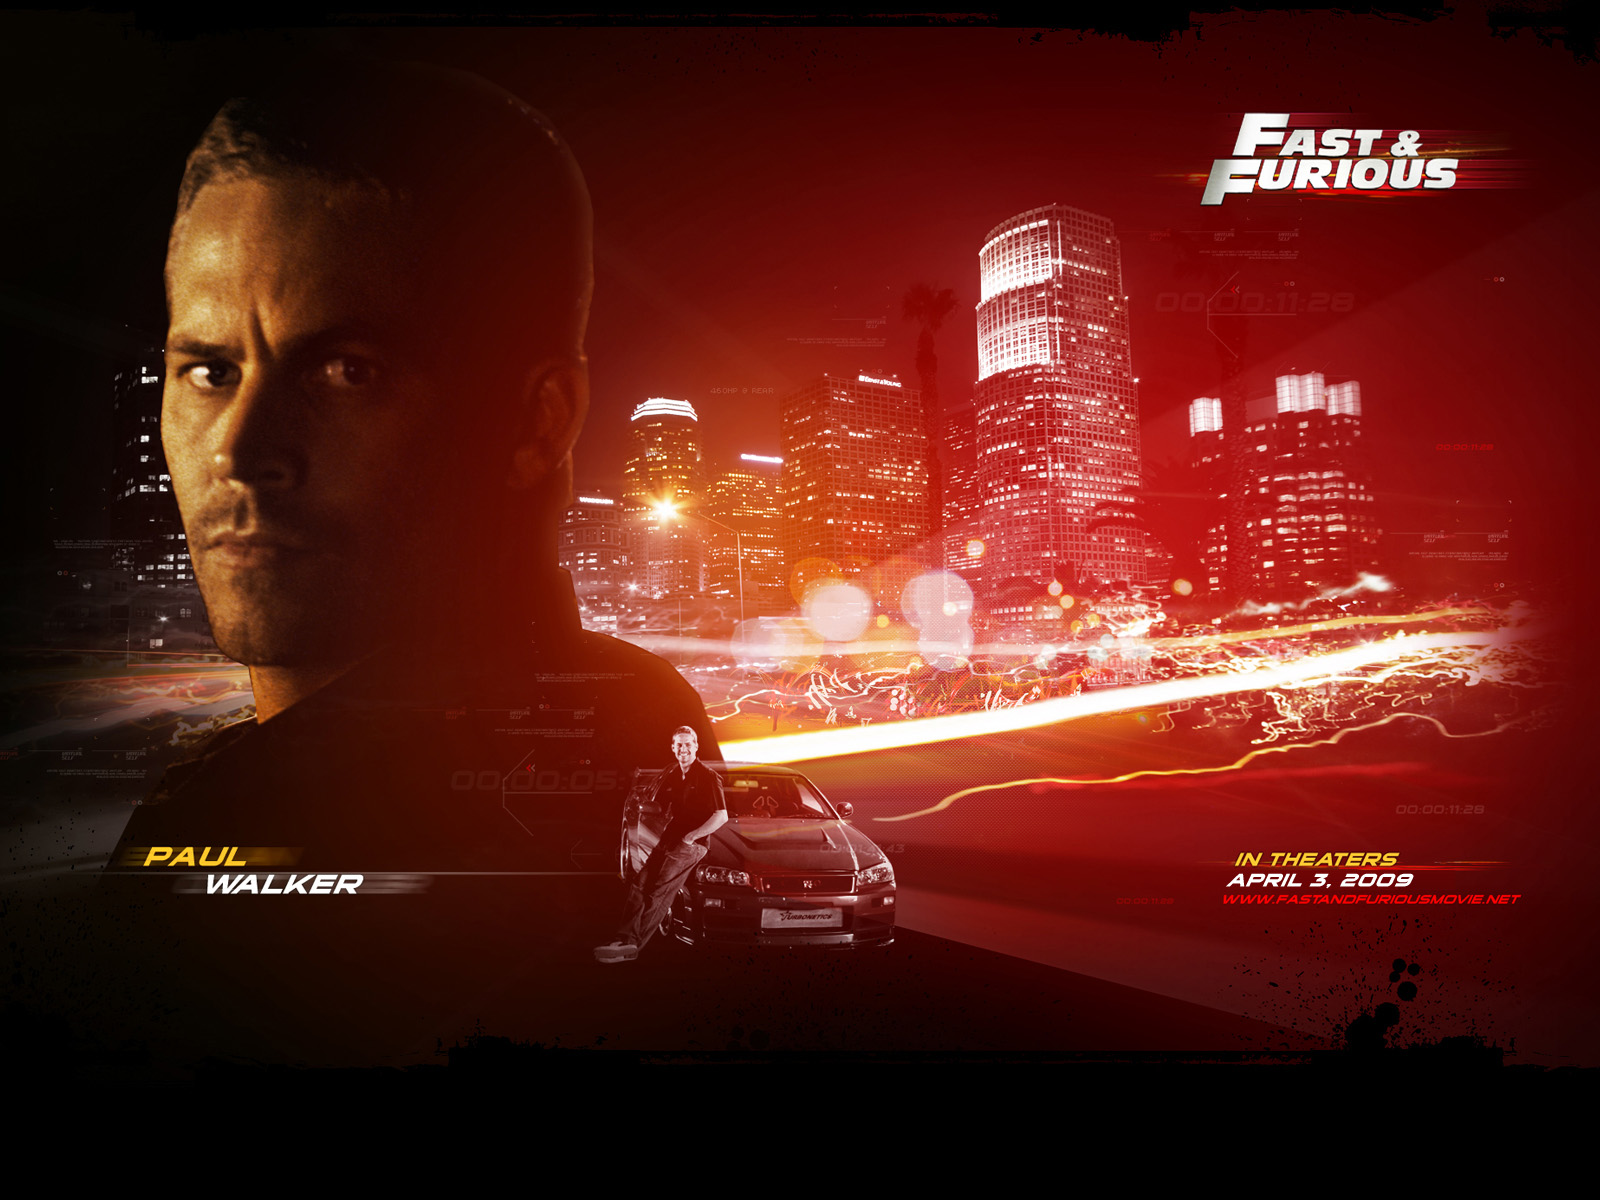 wallpapers fast & furious, brian o'conner, paul walker, movie